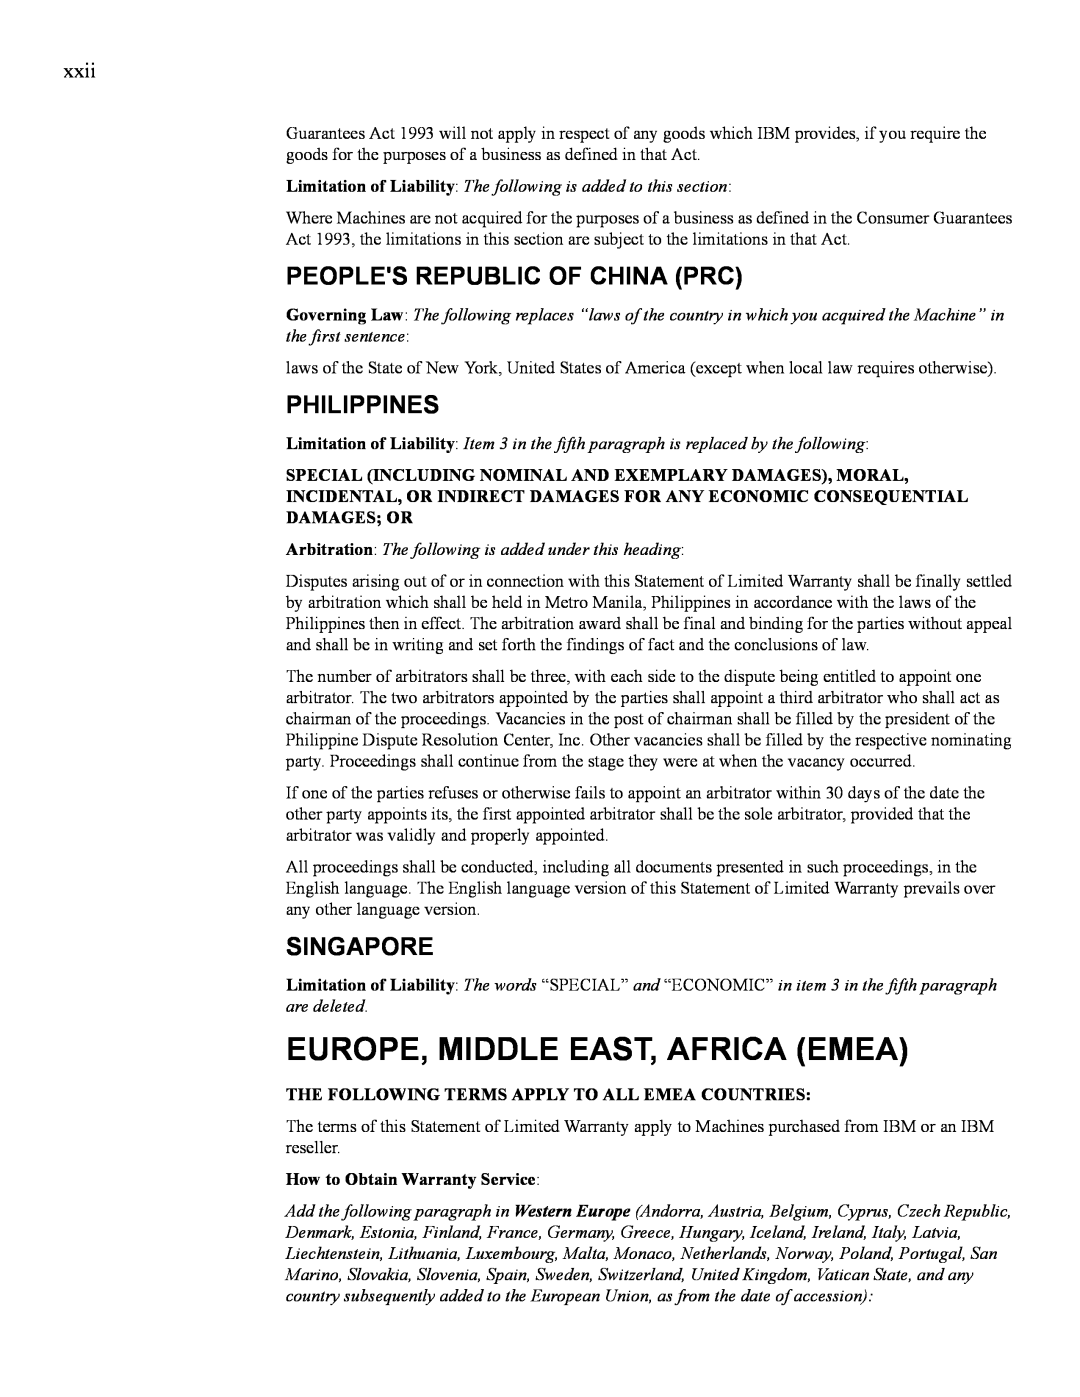 IBM 24R9718 IB manual Europe, Middle East, Africa Emea, Peoples Republic Of China Prc, Philippines, Singapore, Damages Or 